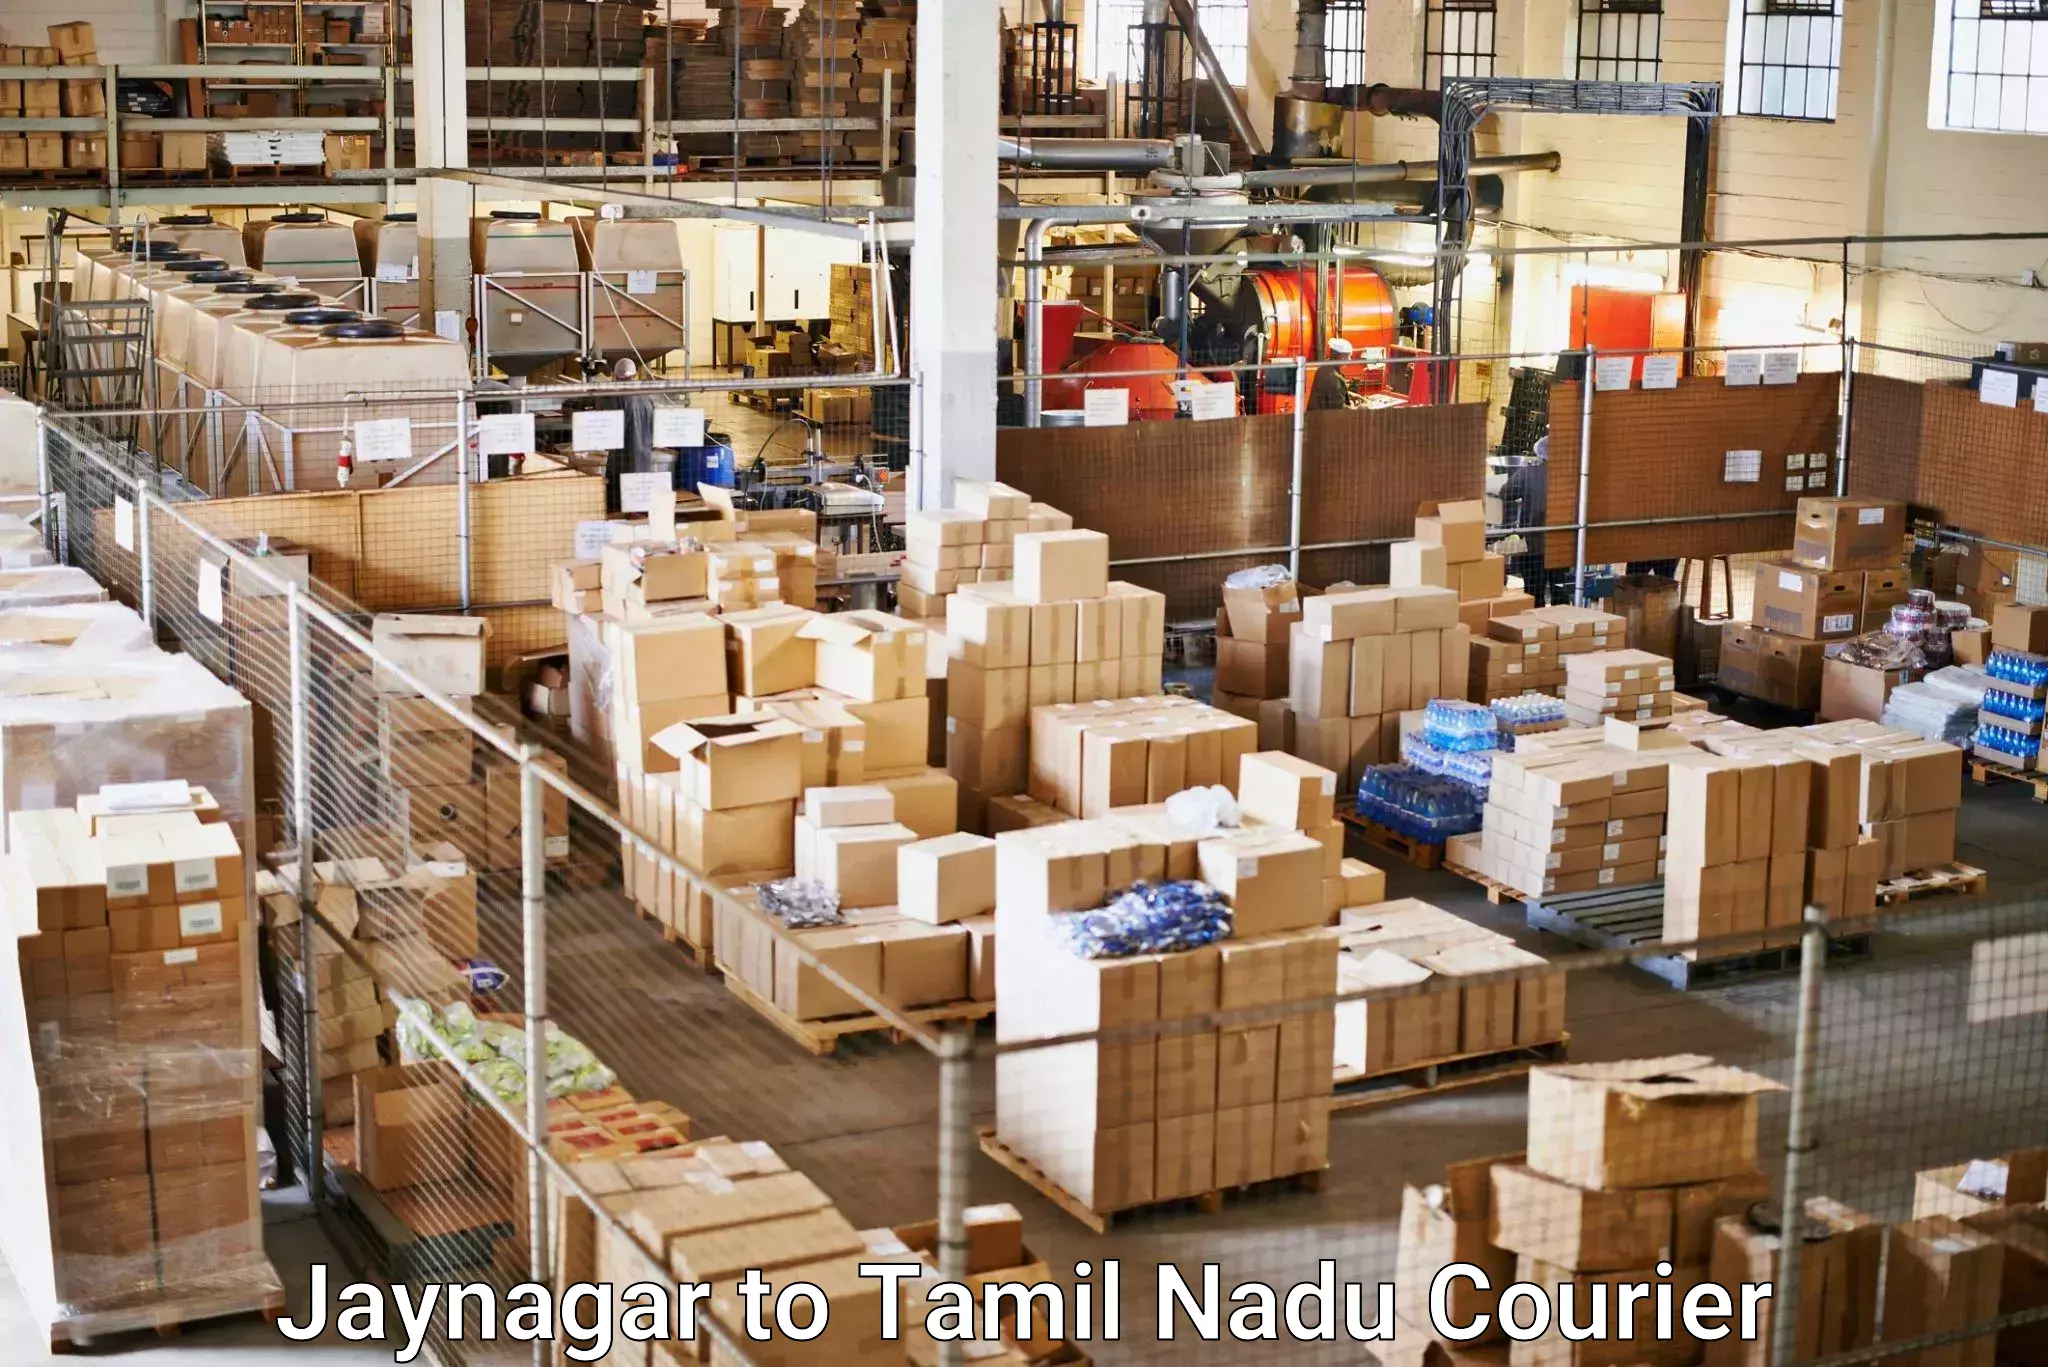 Reliable shipping partners Jaynagar to Ennore Port Chennai